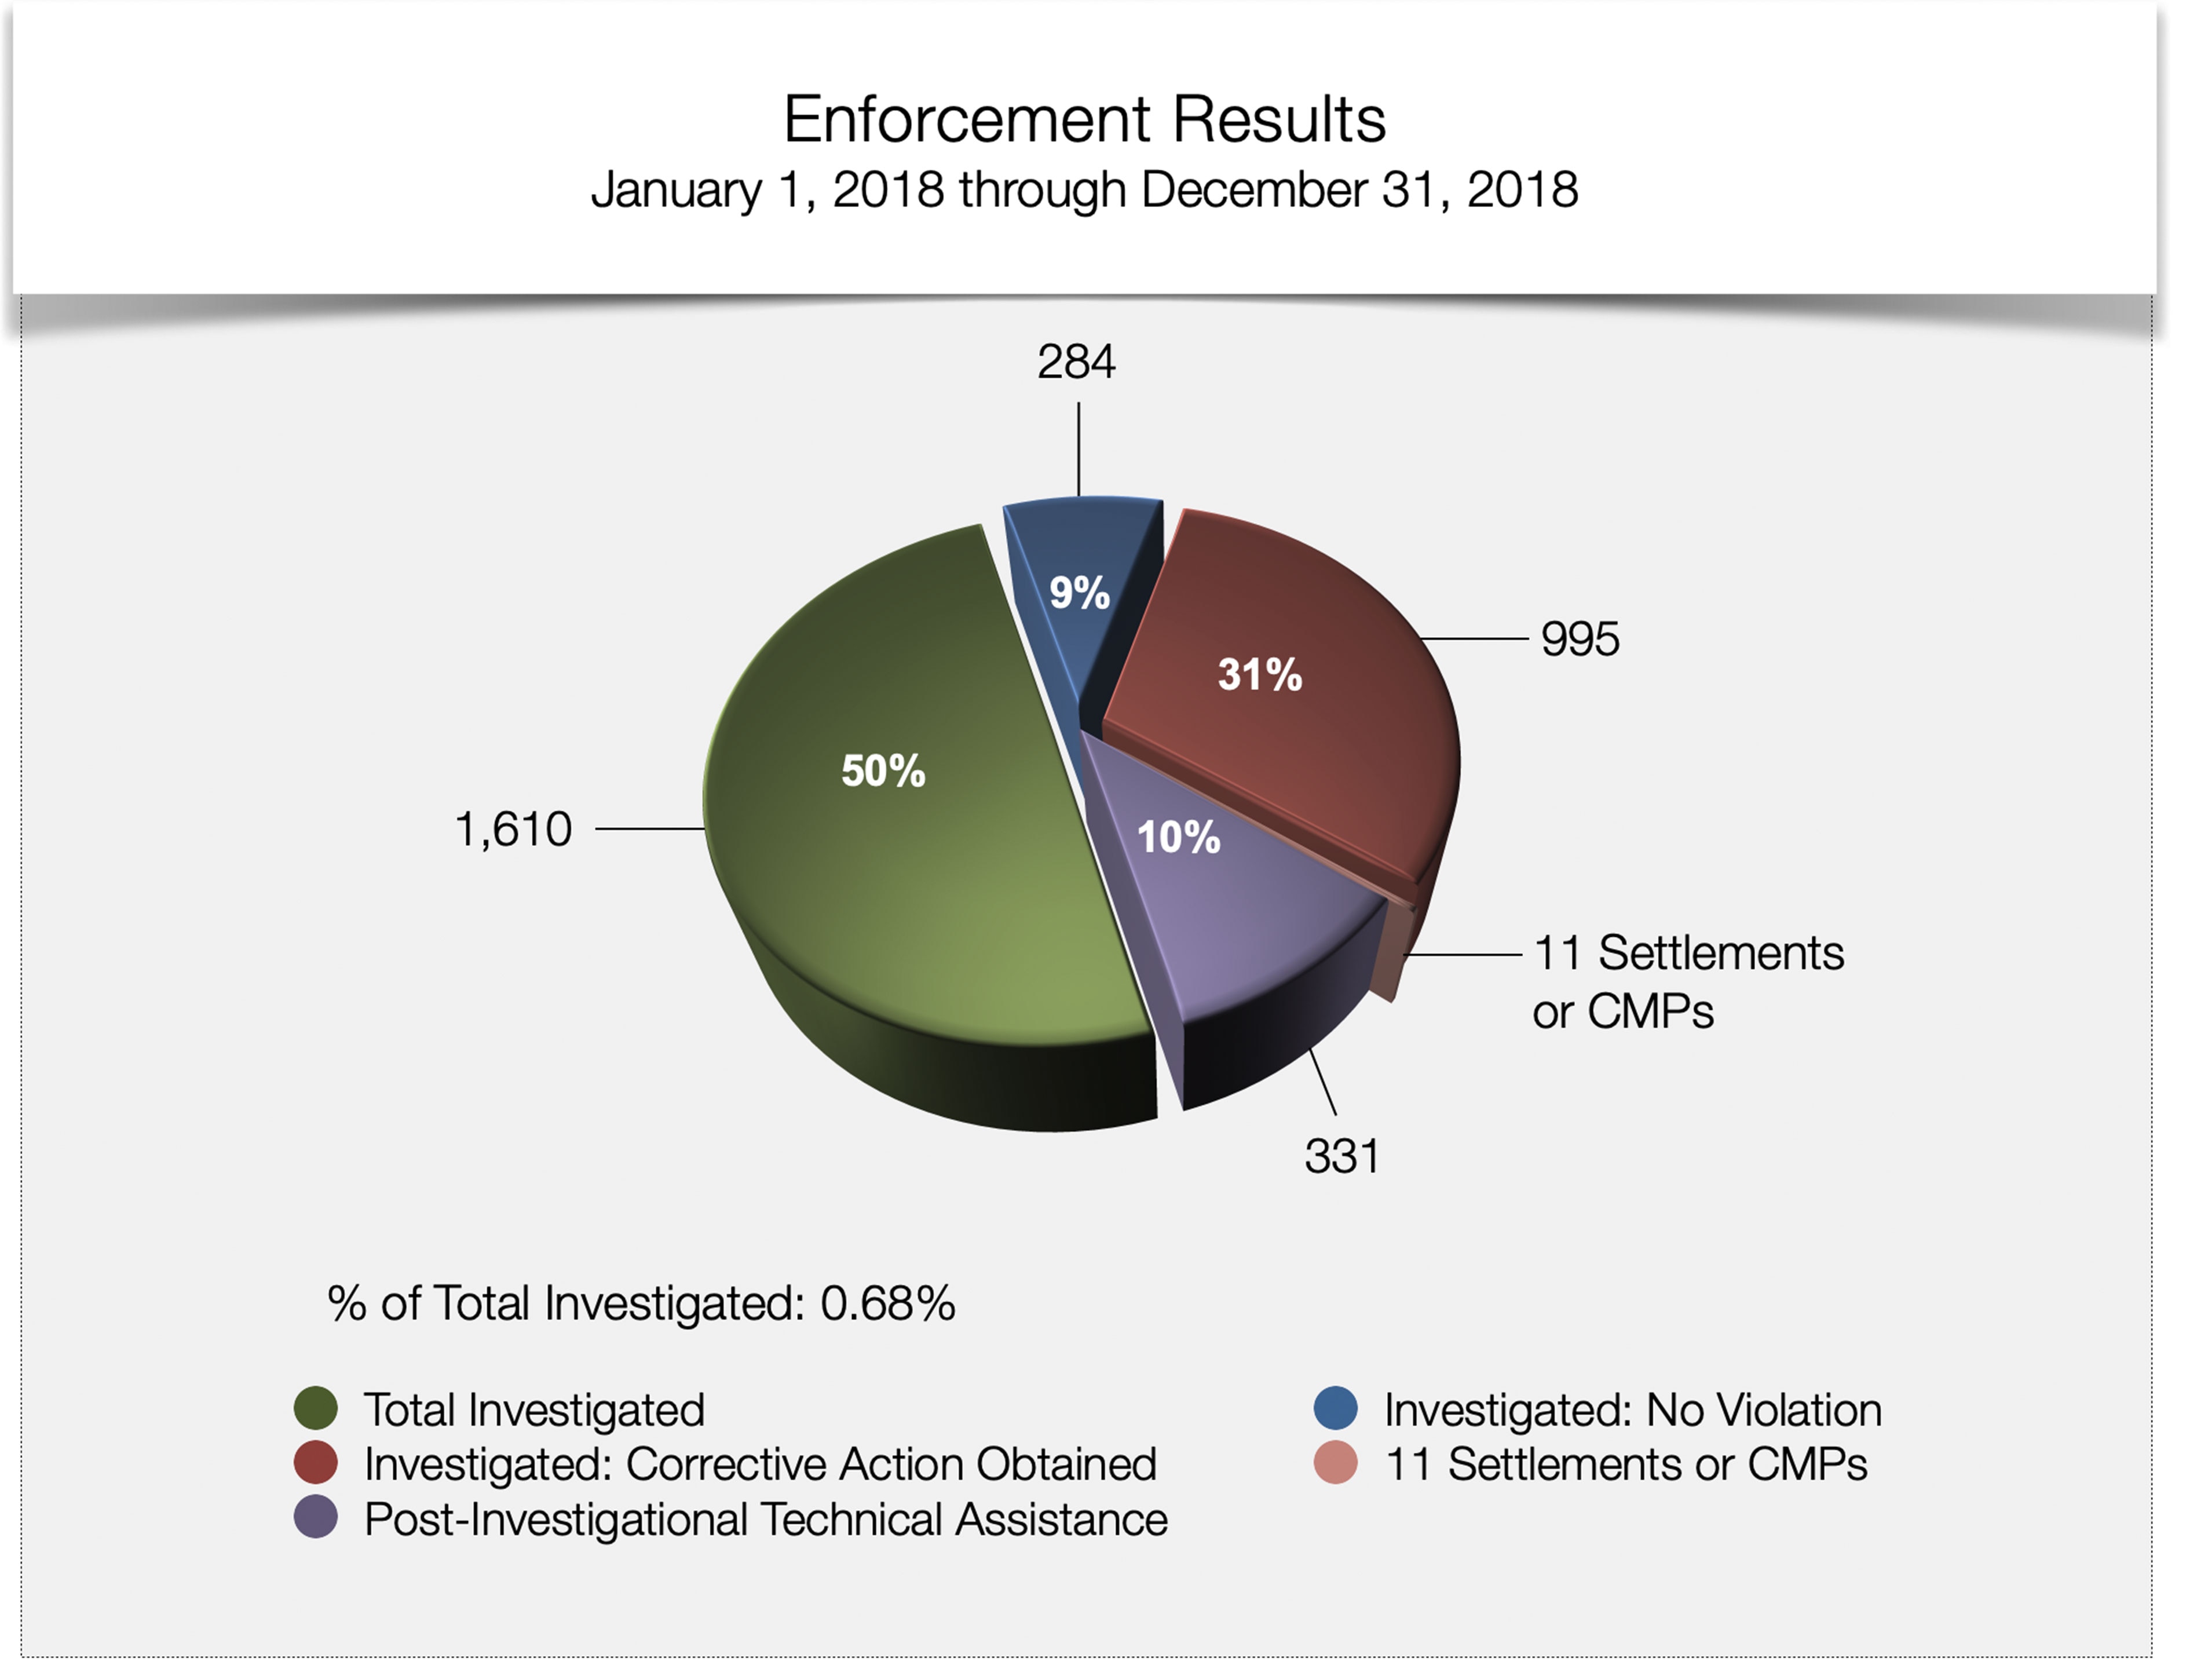 Enforcement Results - January 1, 2018 through December 31, 2018